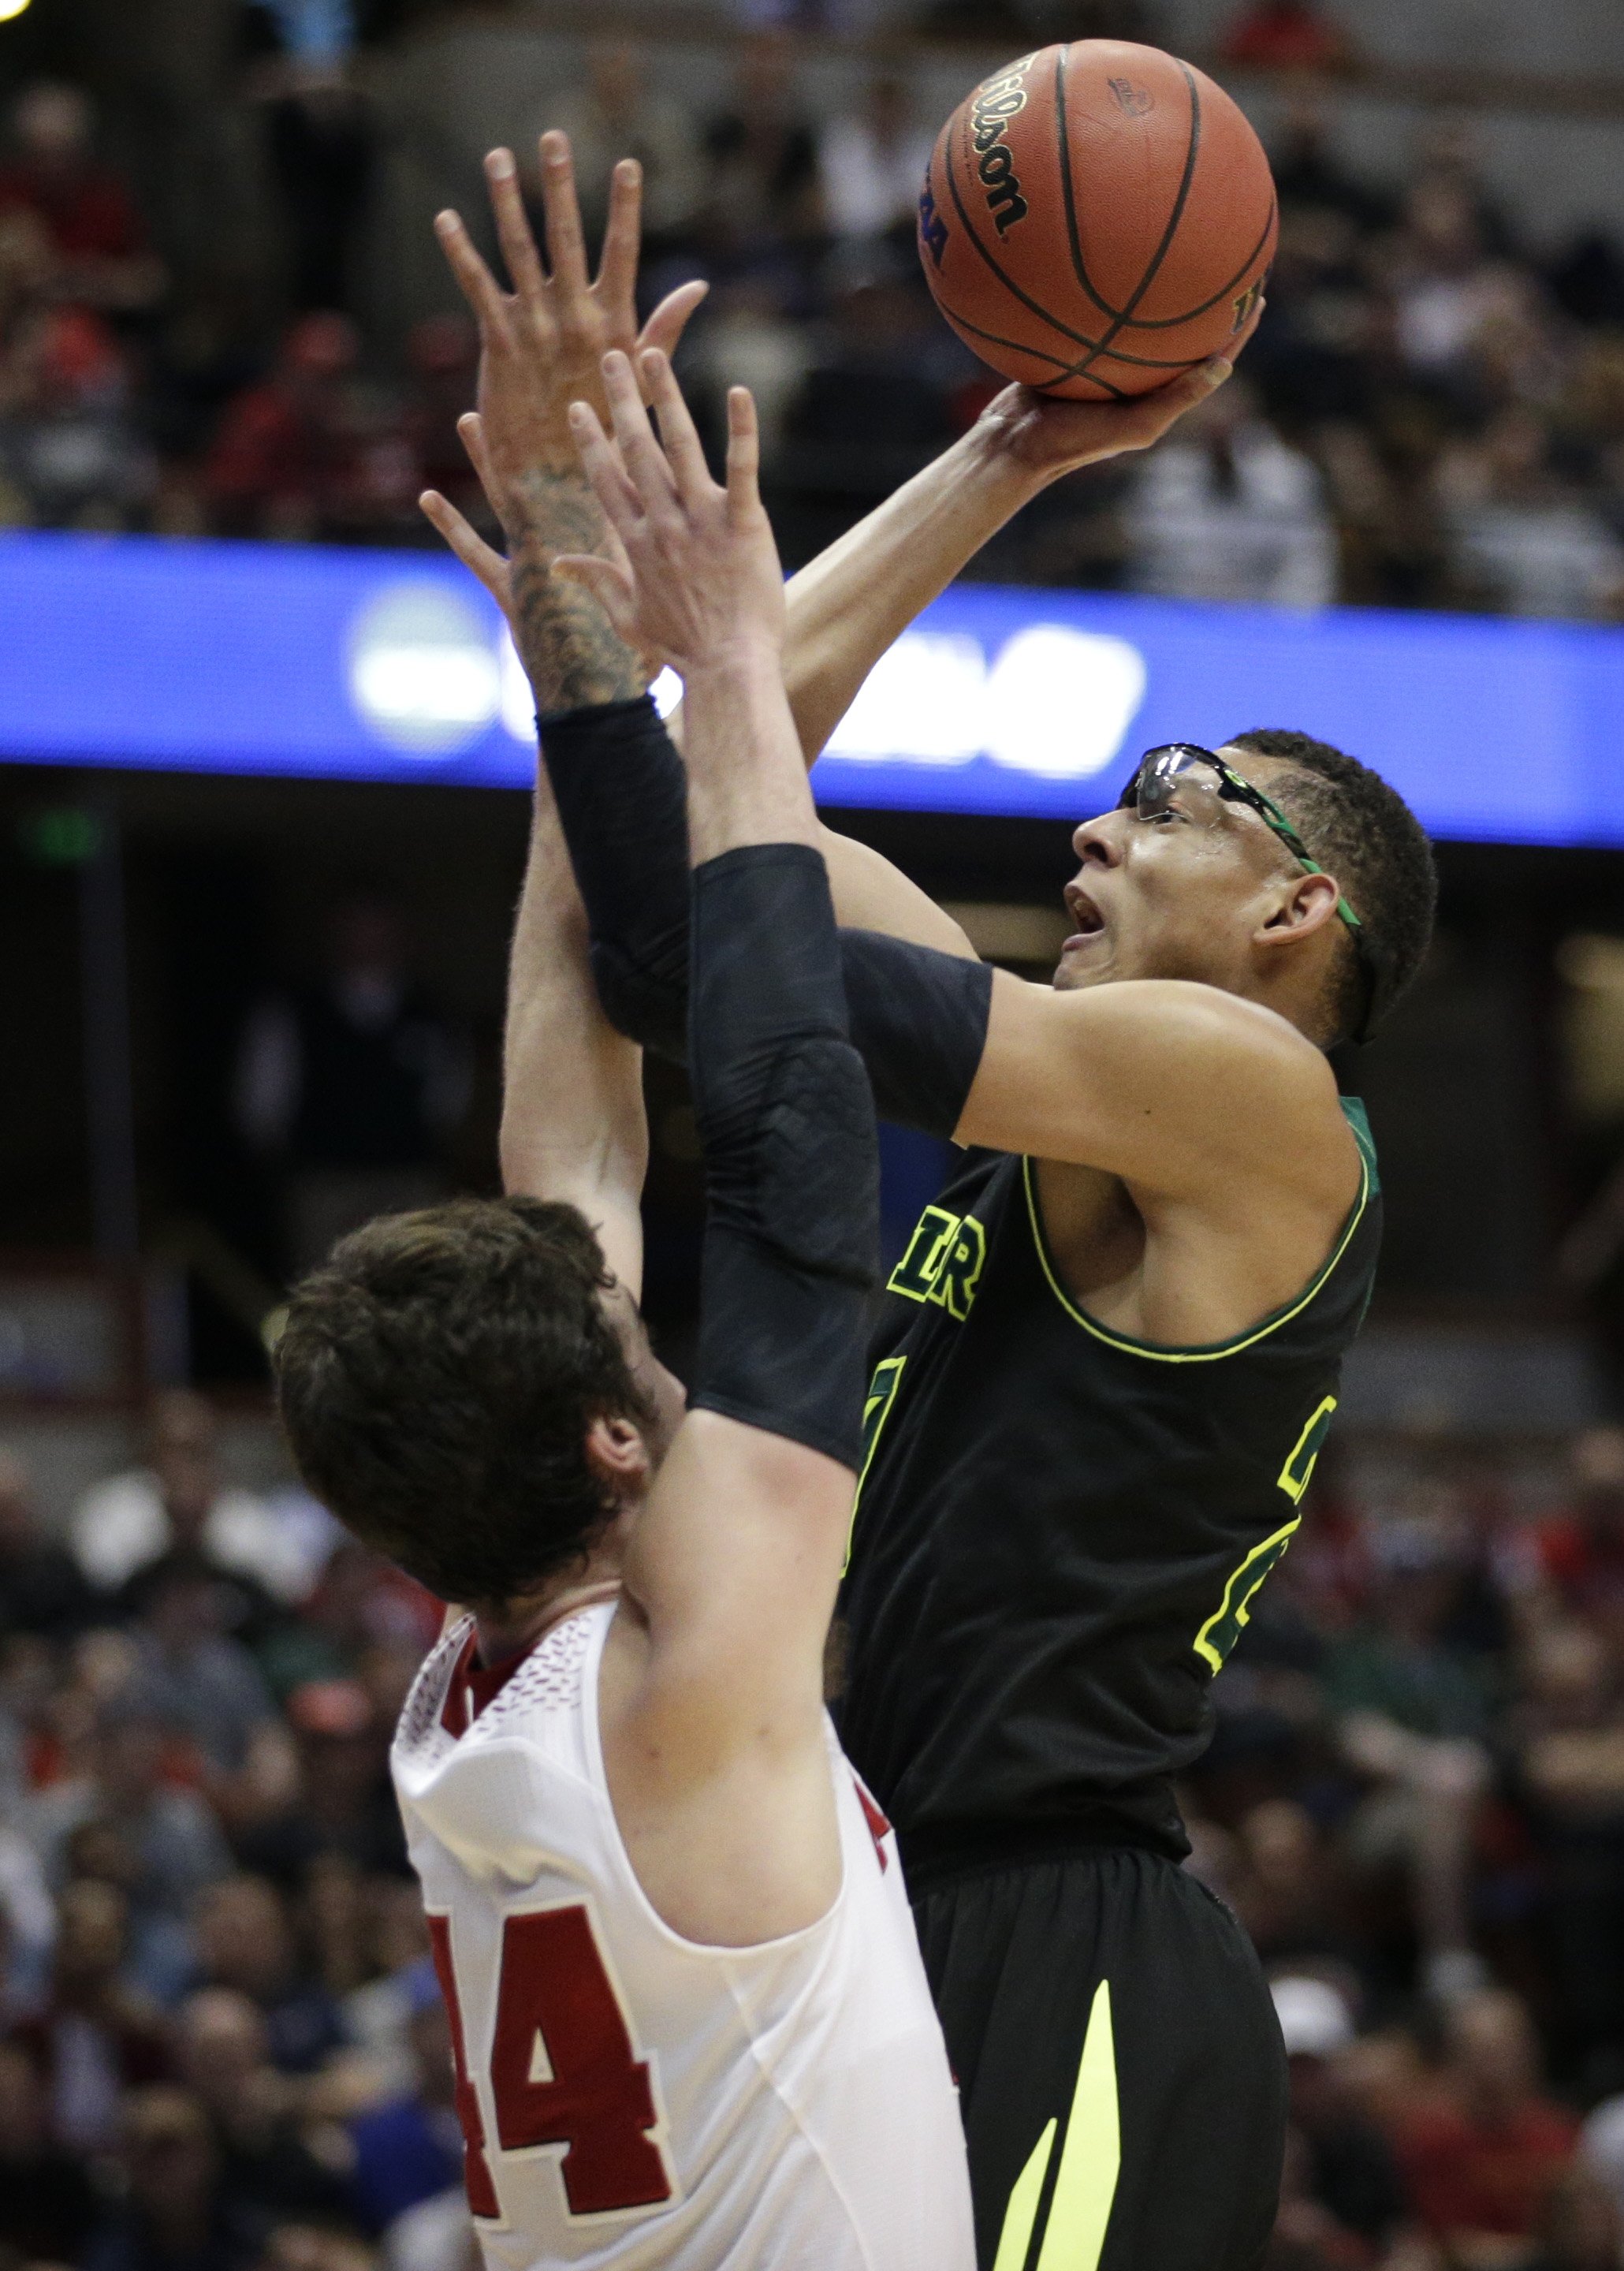 Baylor center Isaiah Austin shoots during the second half of an NCAA men's college basketball tournament regional semifinal, in Anaheim, Calif. on March 27, 2014. (Jae C. Hong—AP)